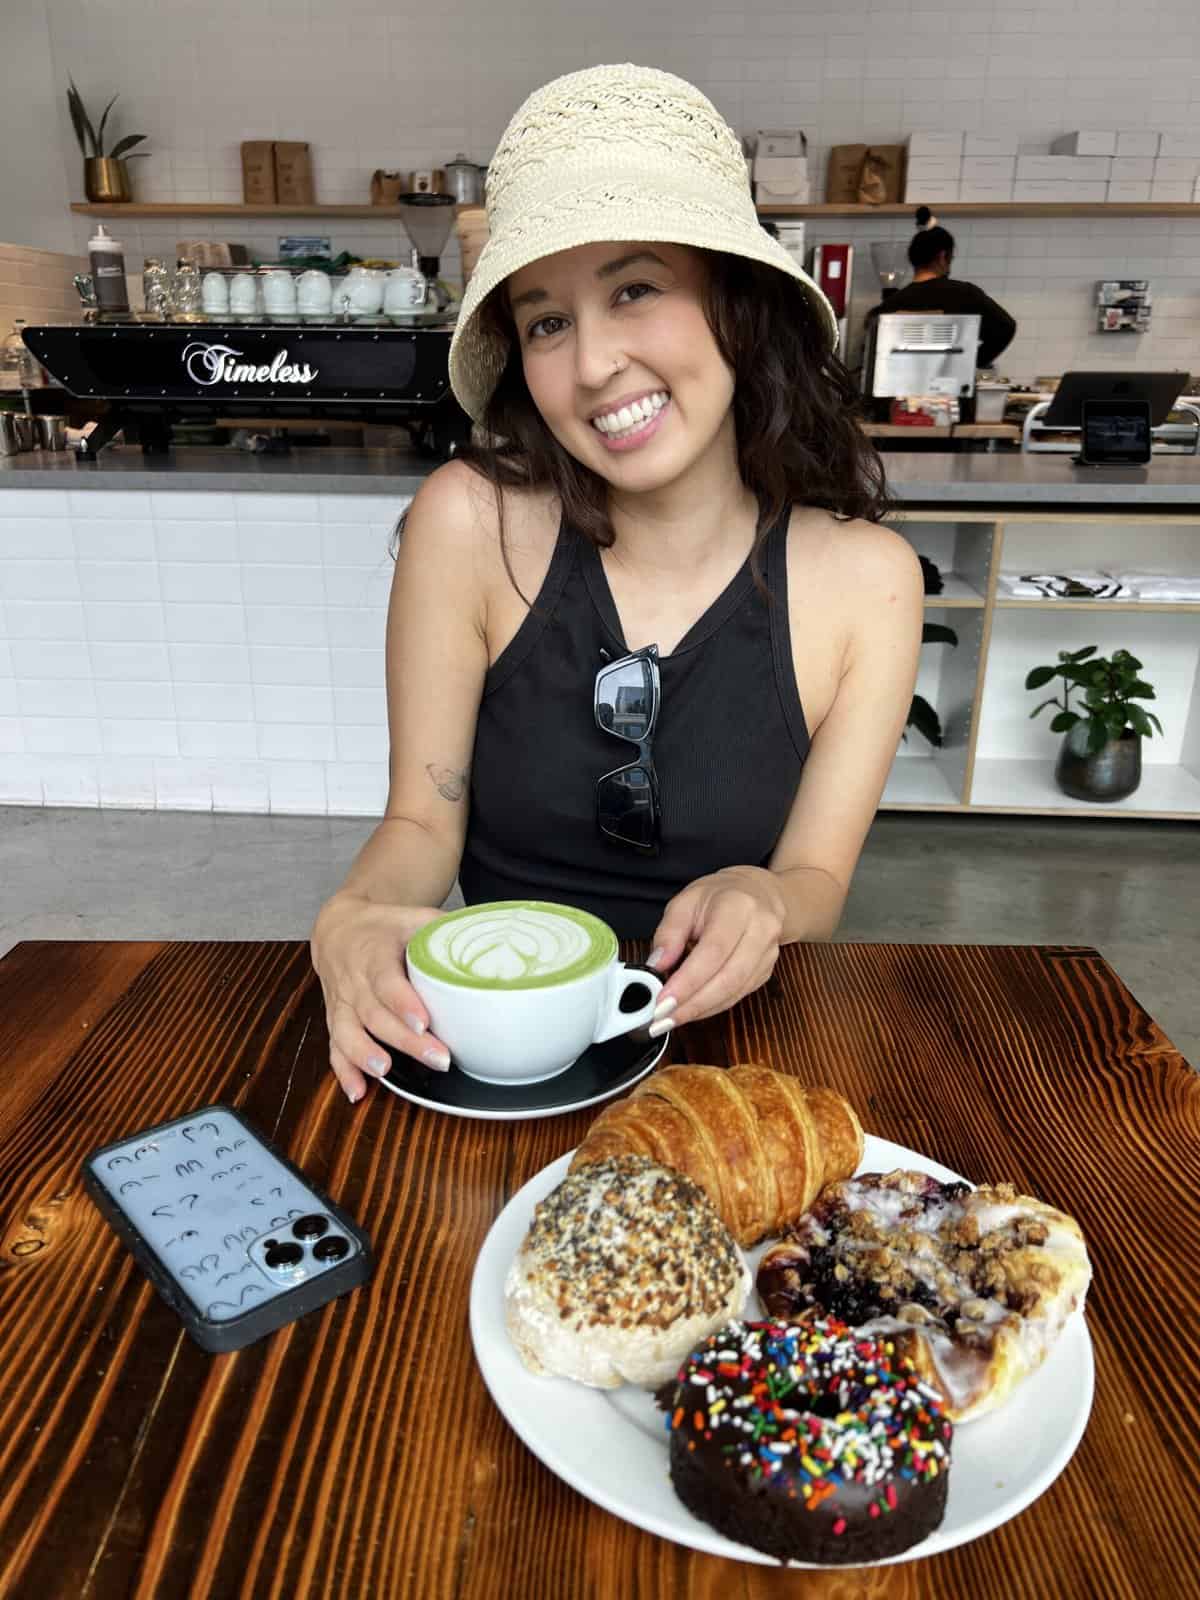 jasmine of sweet simple vegan posing with a matcha latte and pastries